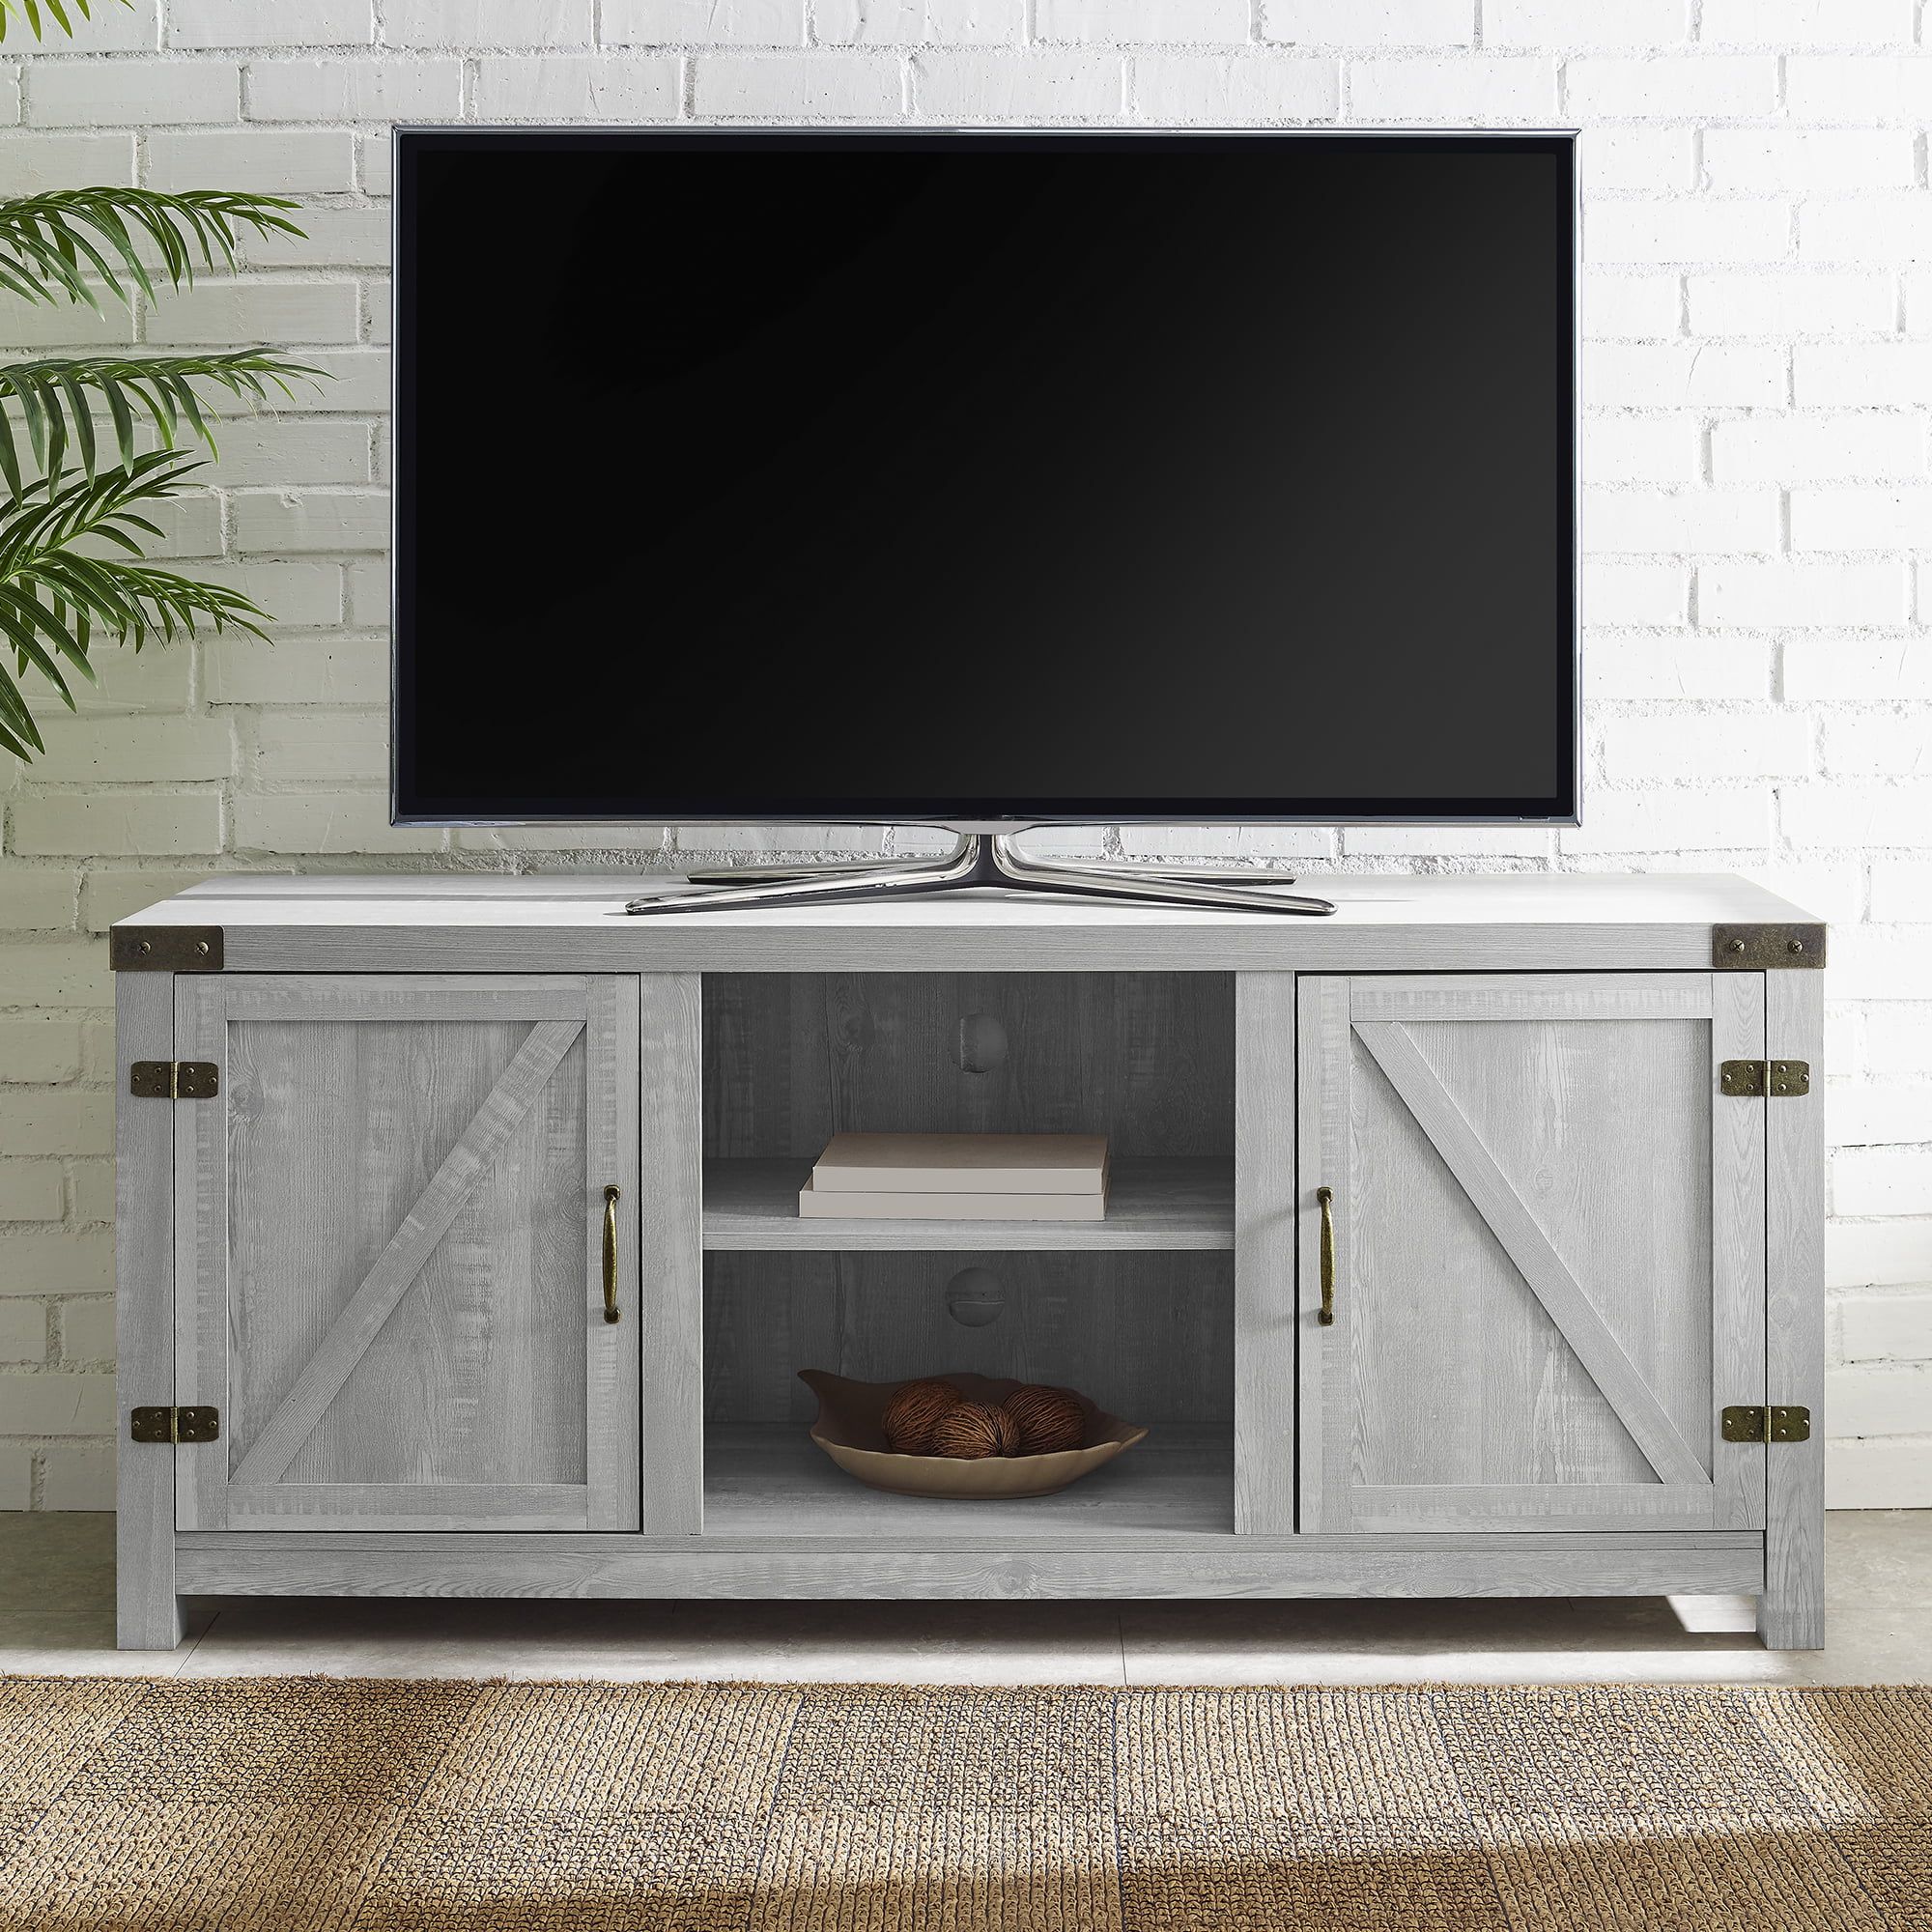 Woven Paths Modern Farmhouse Barn Door Tv Stand For Tvs Up To 65 With Regard To Farmhouse Stands For Tvs (View 14 of 20)